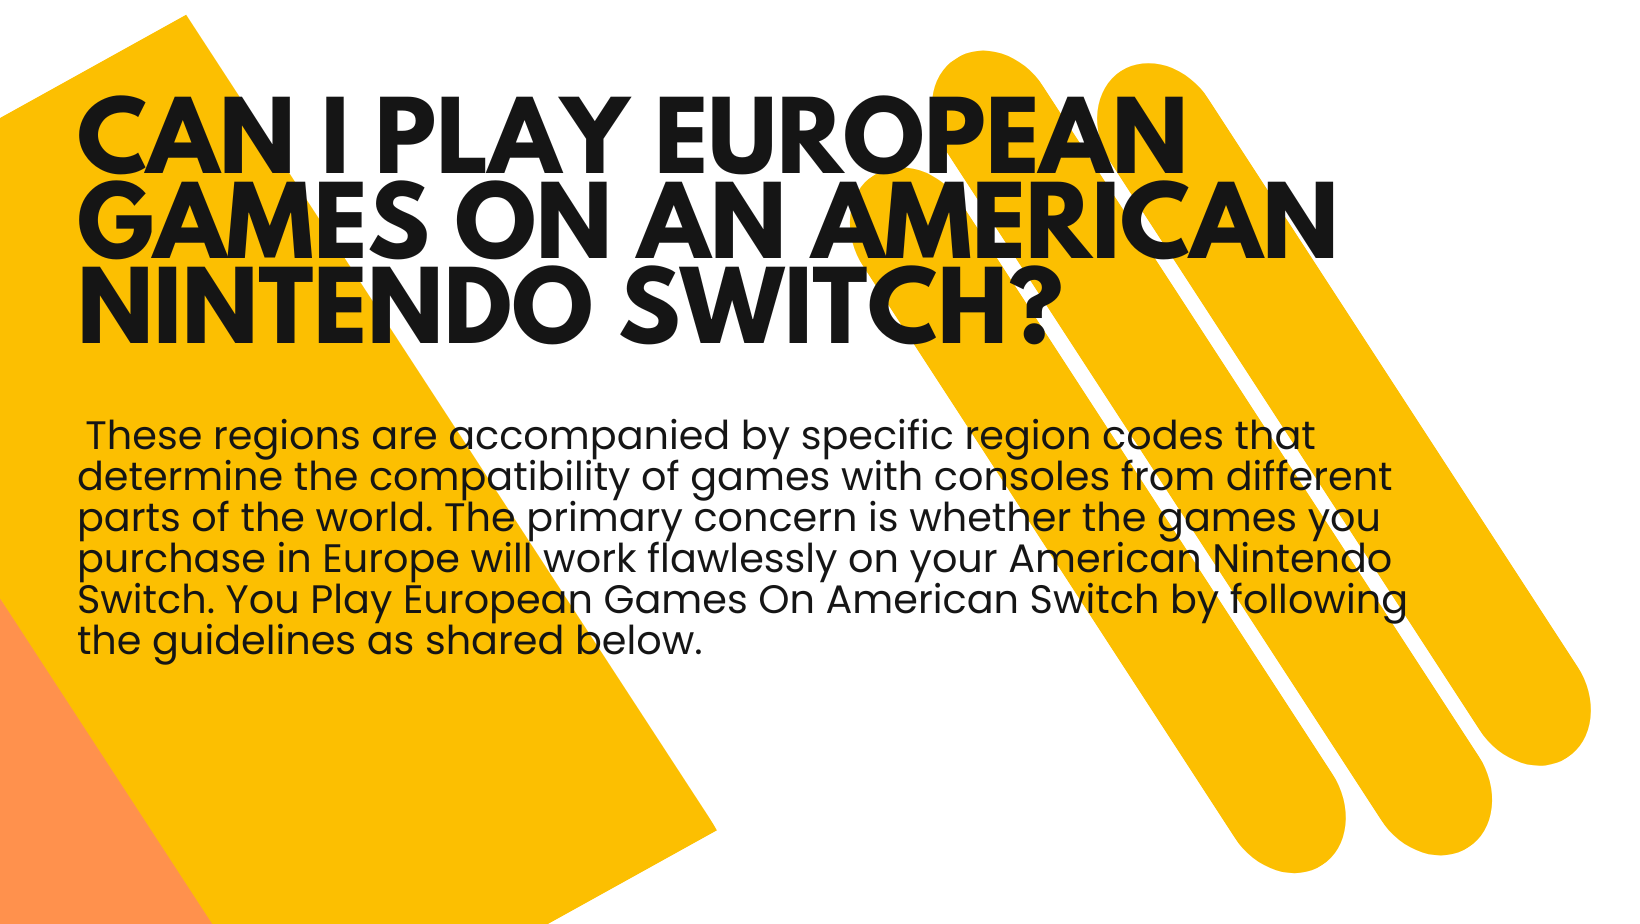 Can I Play European Games on an American Nintendo Switch